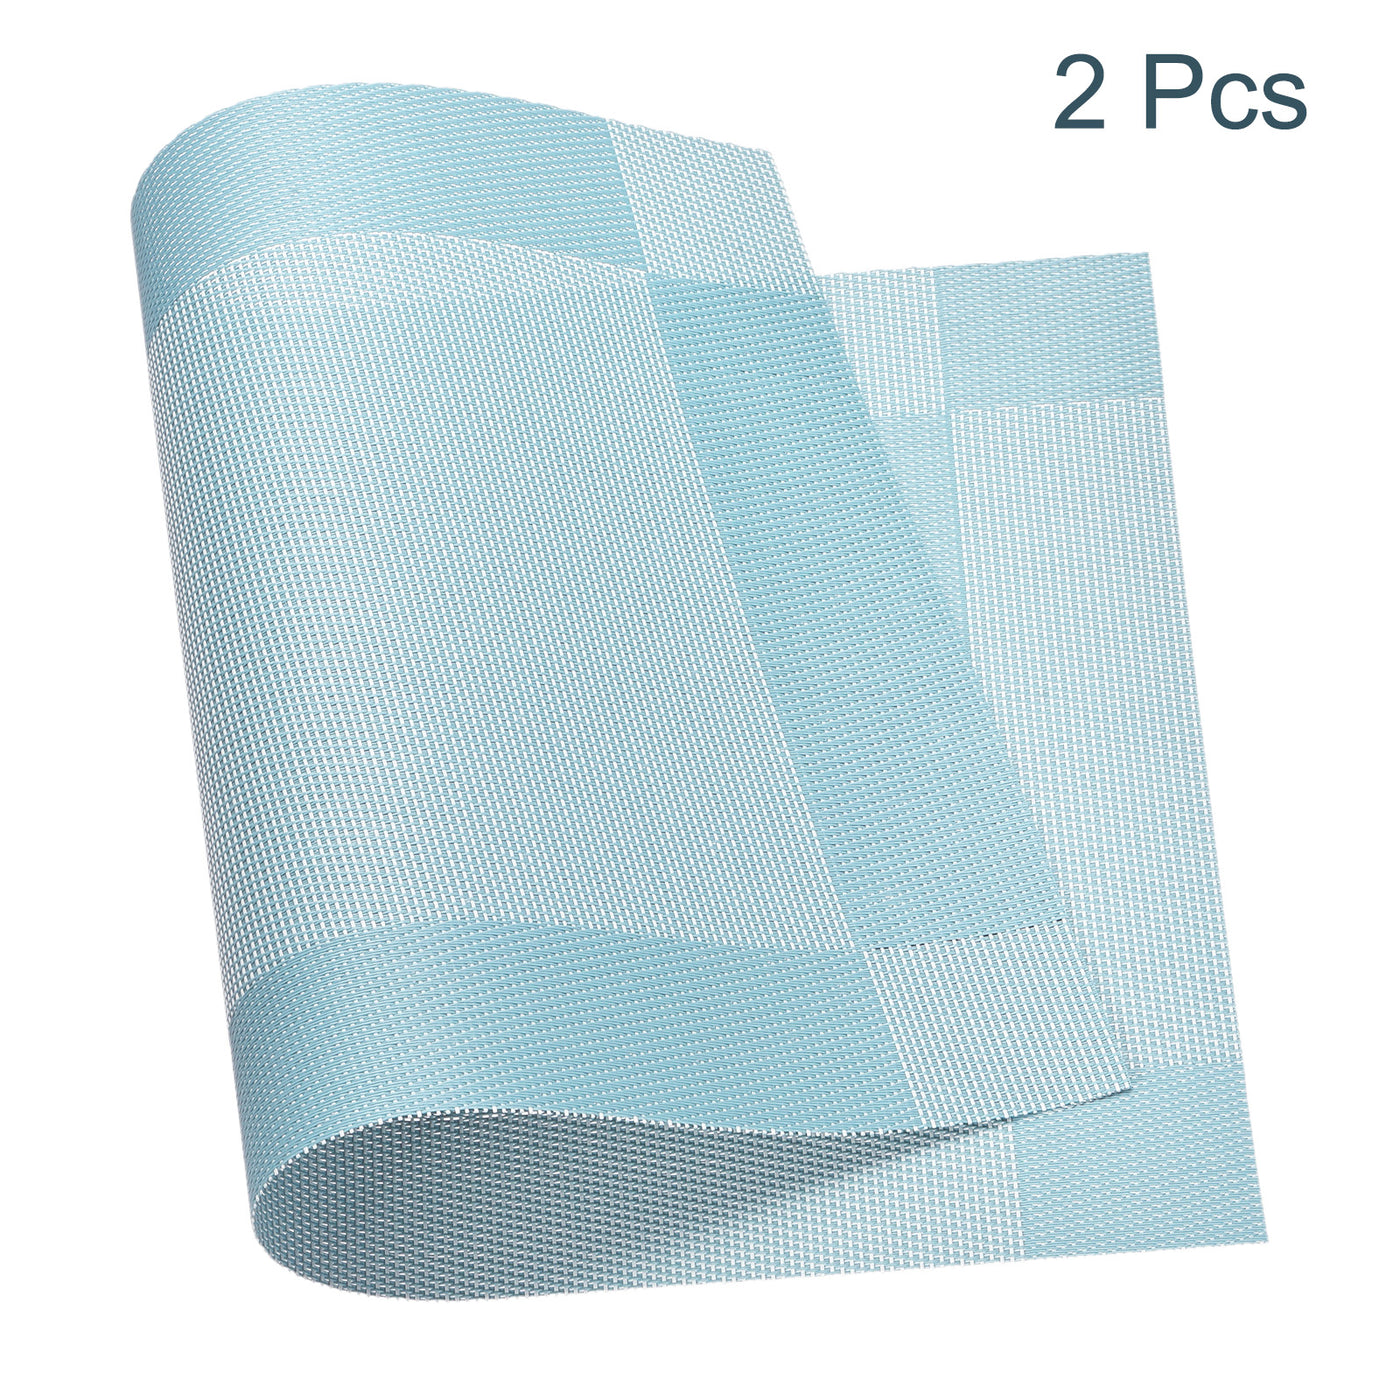 uxcell Uxcell Place Mats 450x300mm 2pcs PVC Table Washable Woven Placemat, Lake Blue